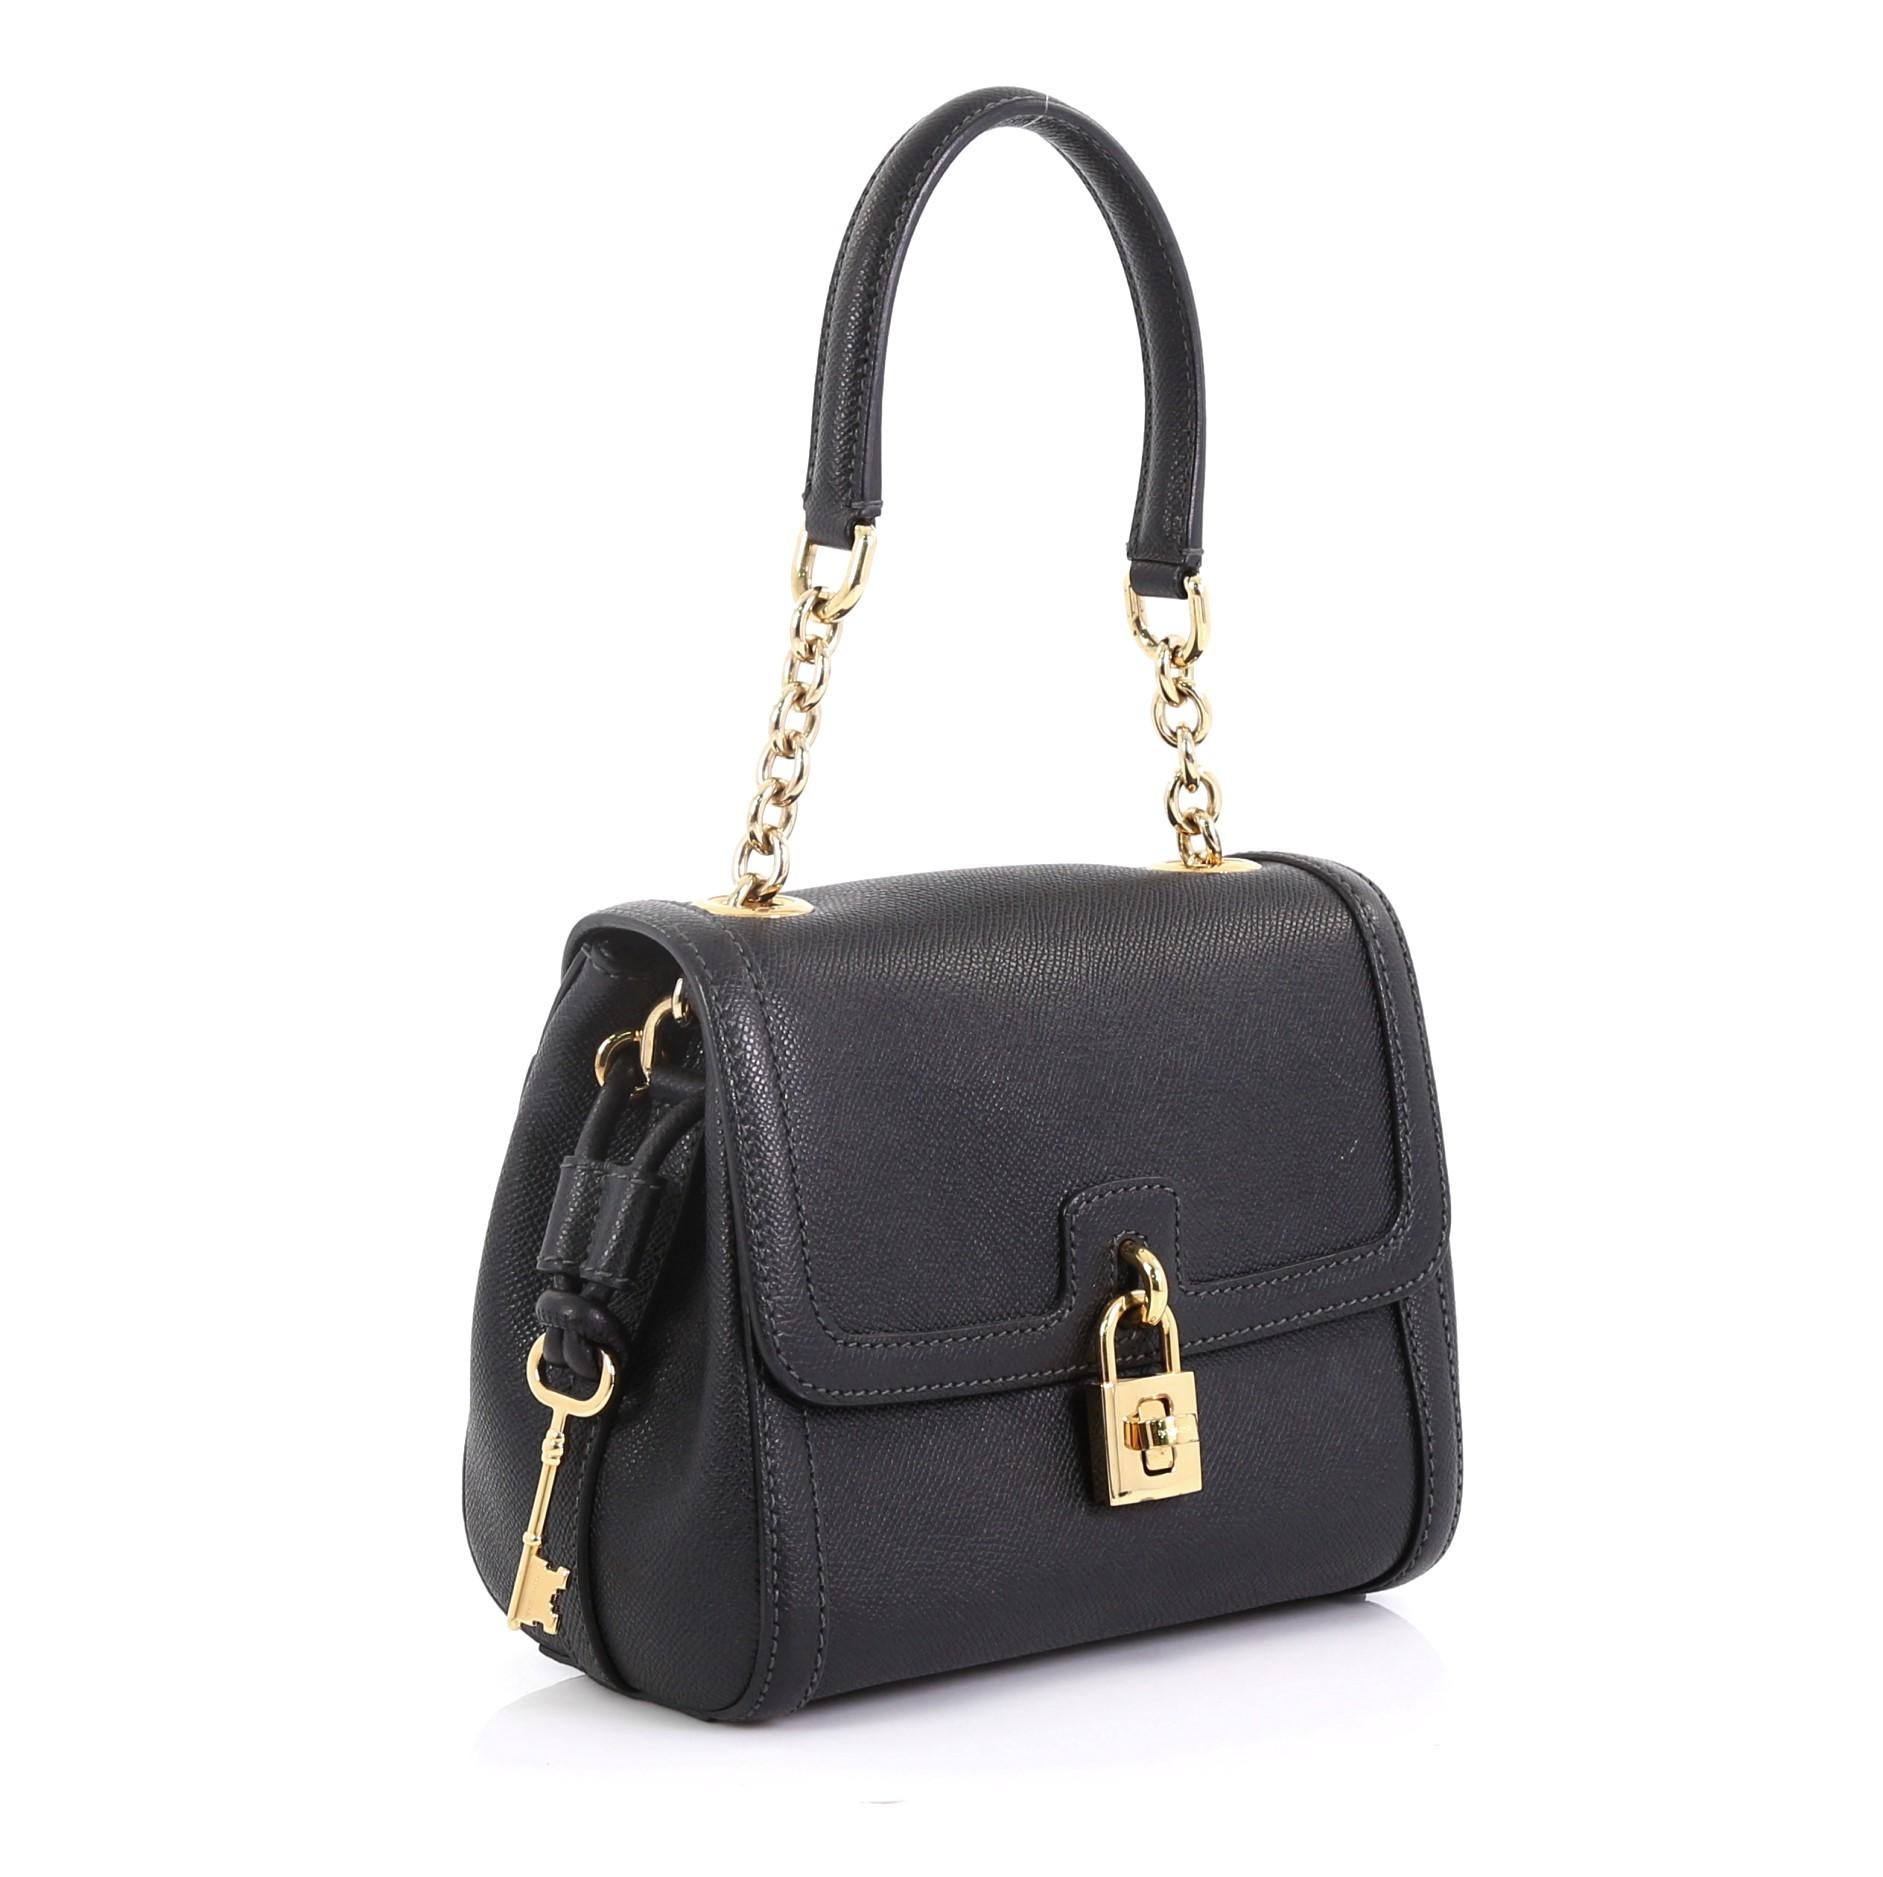 This Dolce & Gabbana Miss Bonita Satchel Leather Mini, crafted in black leather, features a chain-link and leather handle, frontal flap, and gold-tone hardware. Its decorative lock with twist-lock closure opens to a cheetah print fabric interior